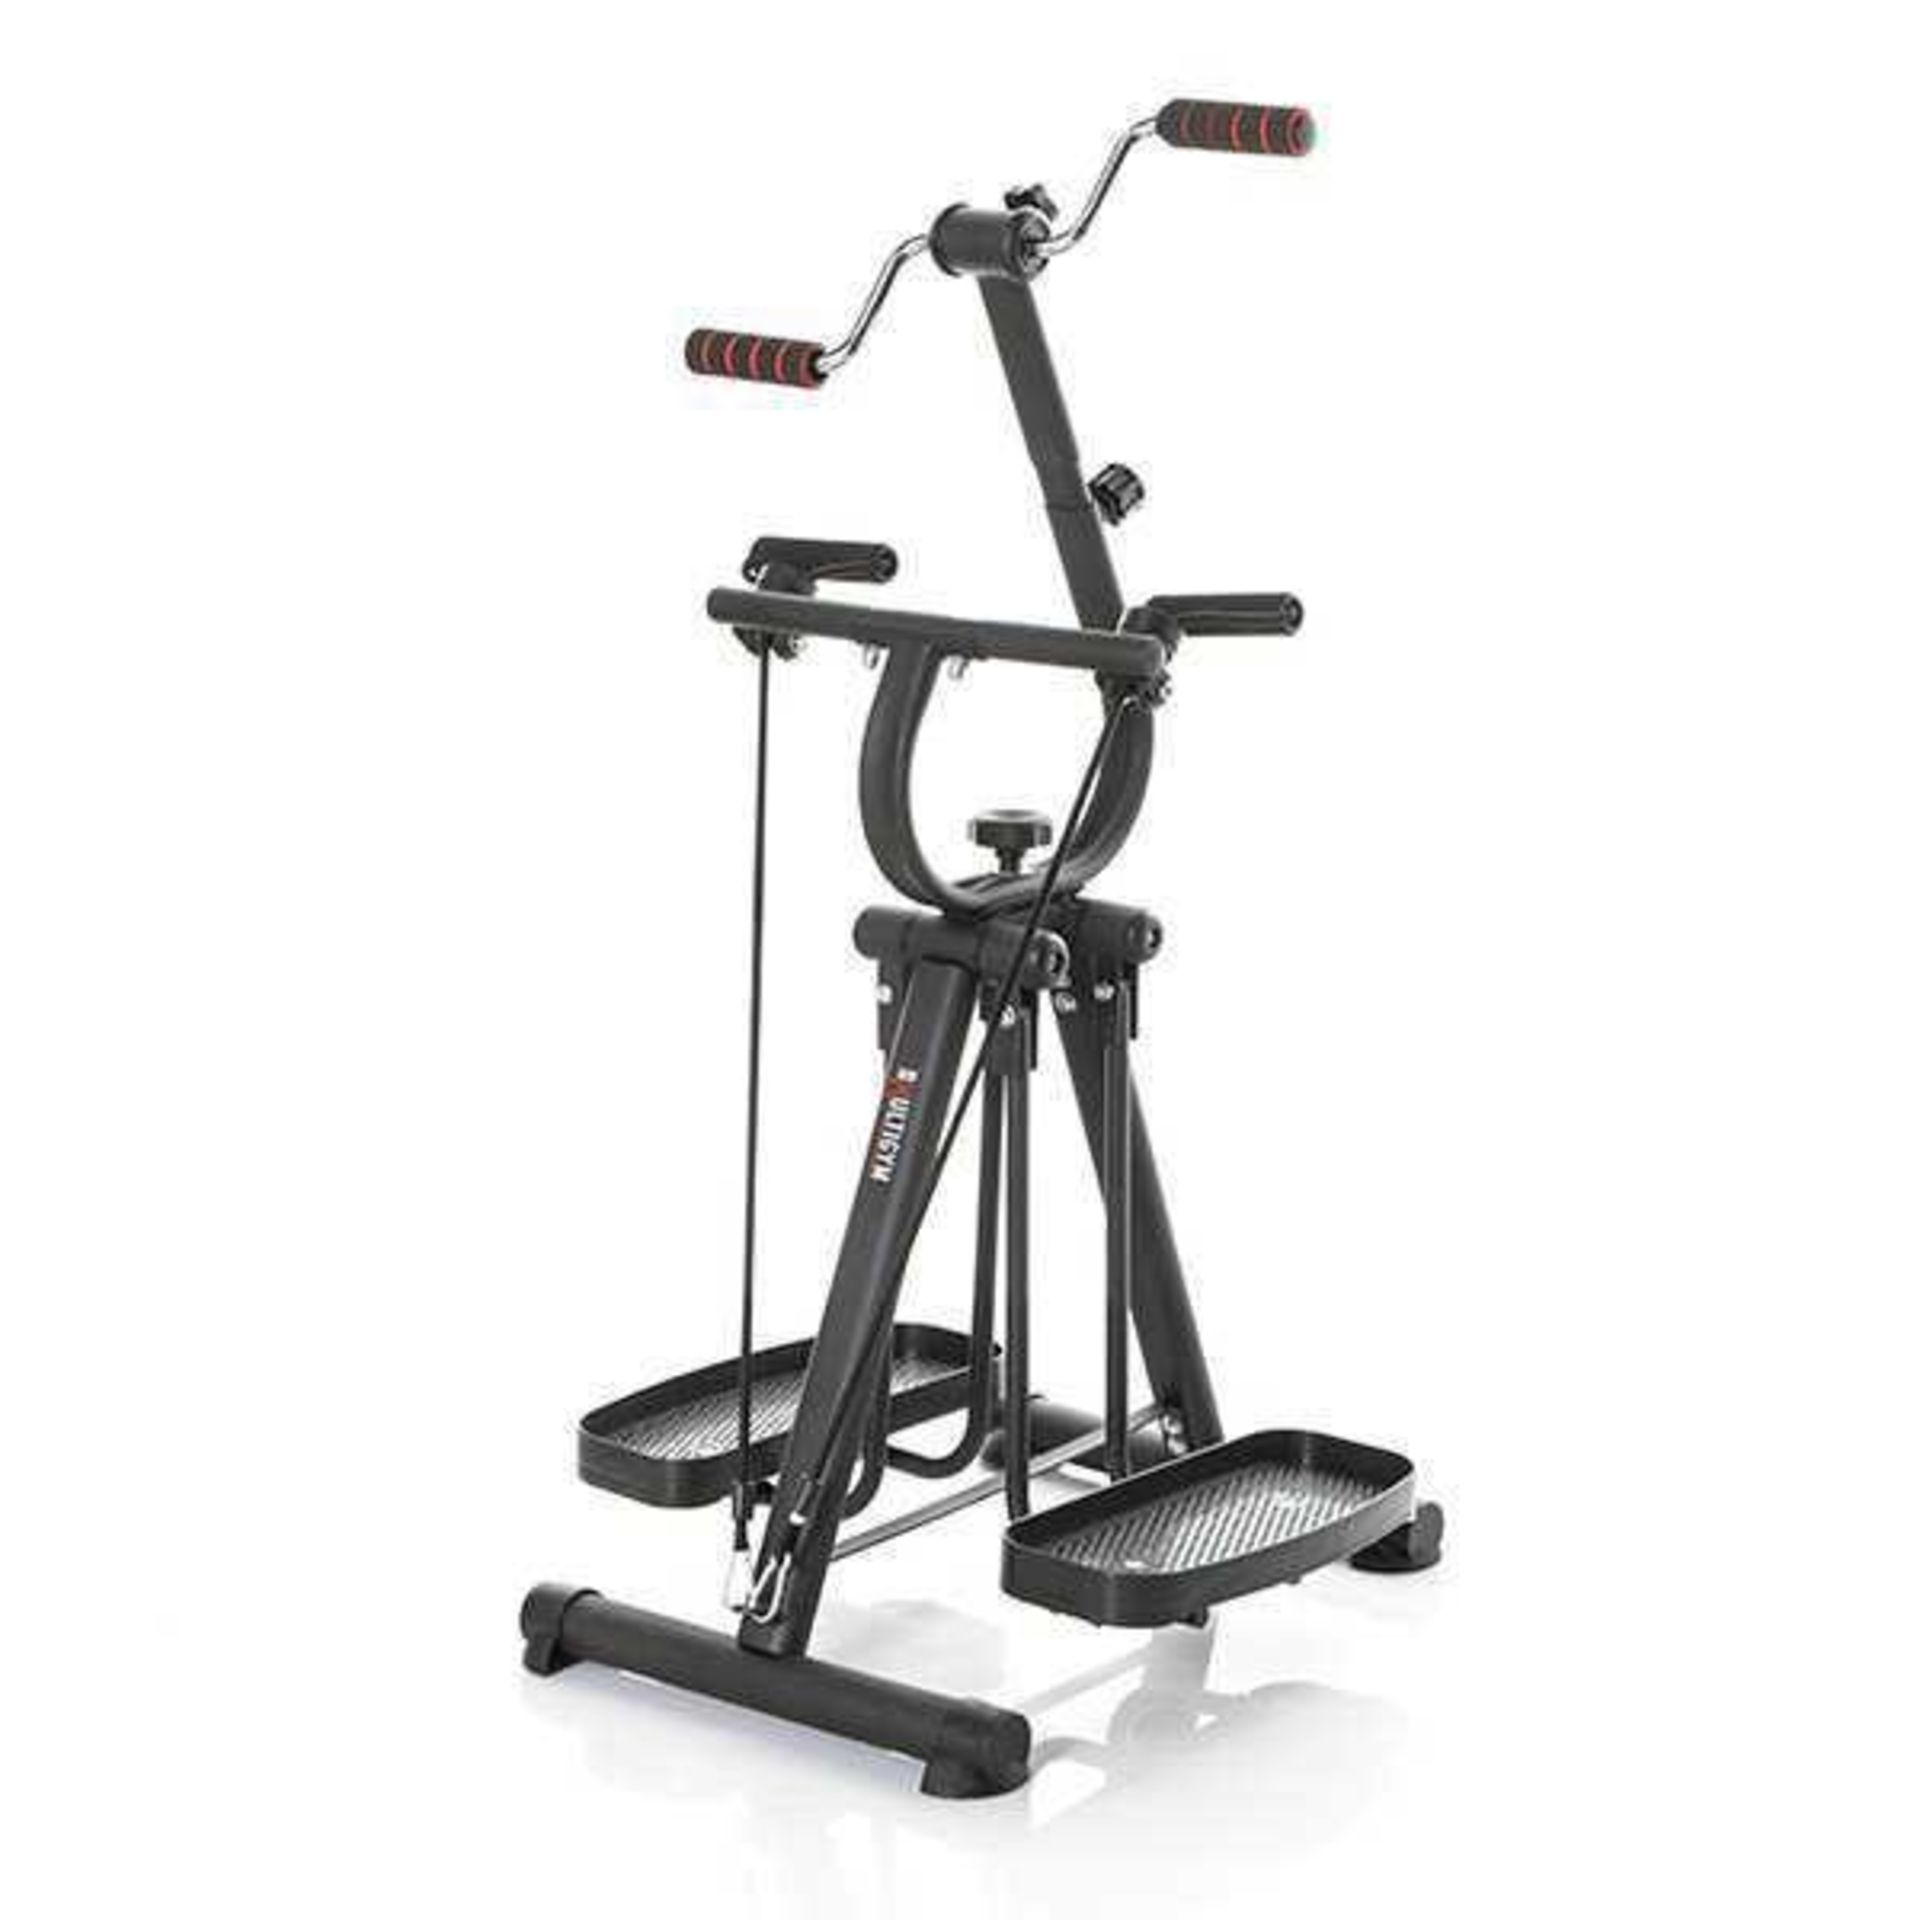 Rrp £100 Boxed Ideal Mini Mobility Trainer